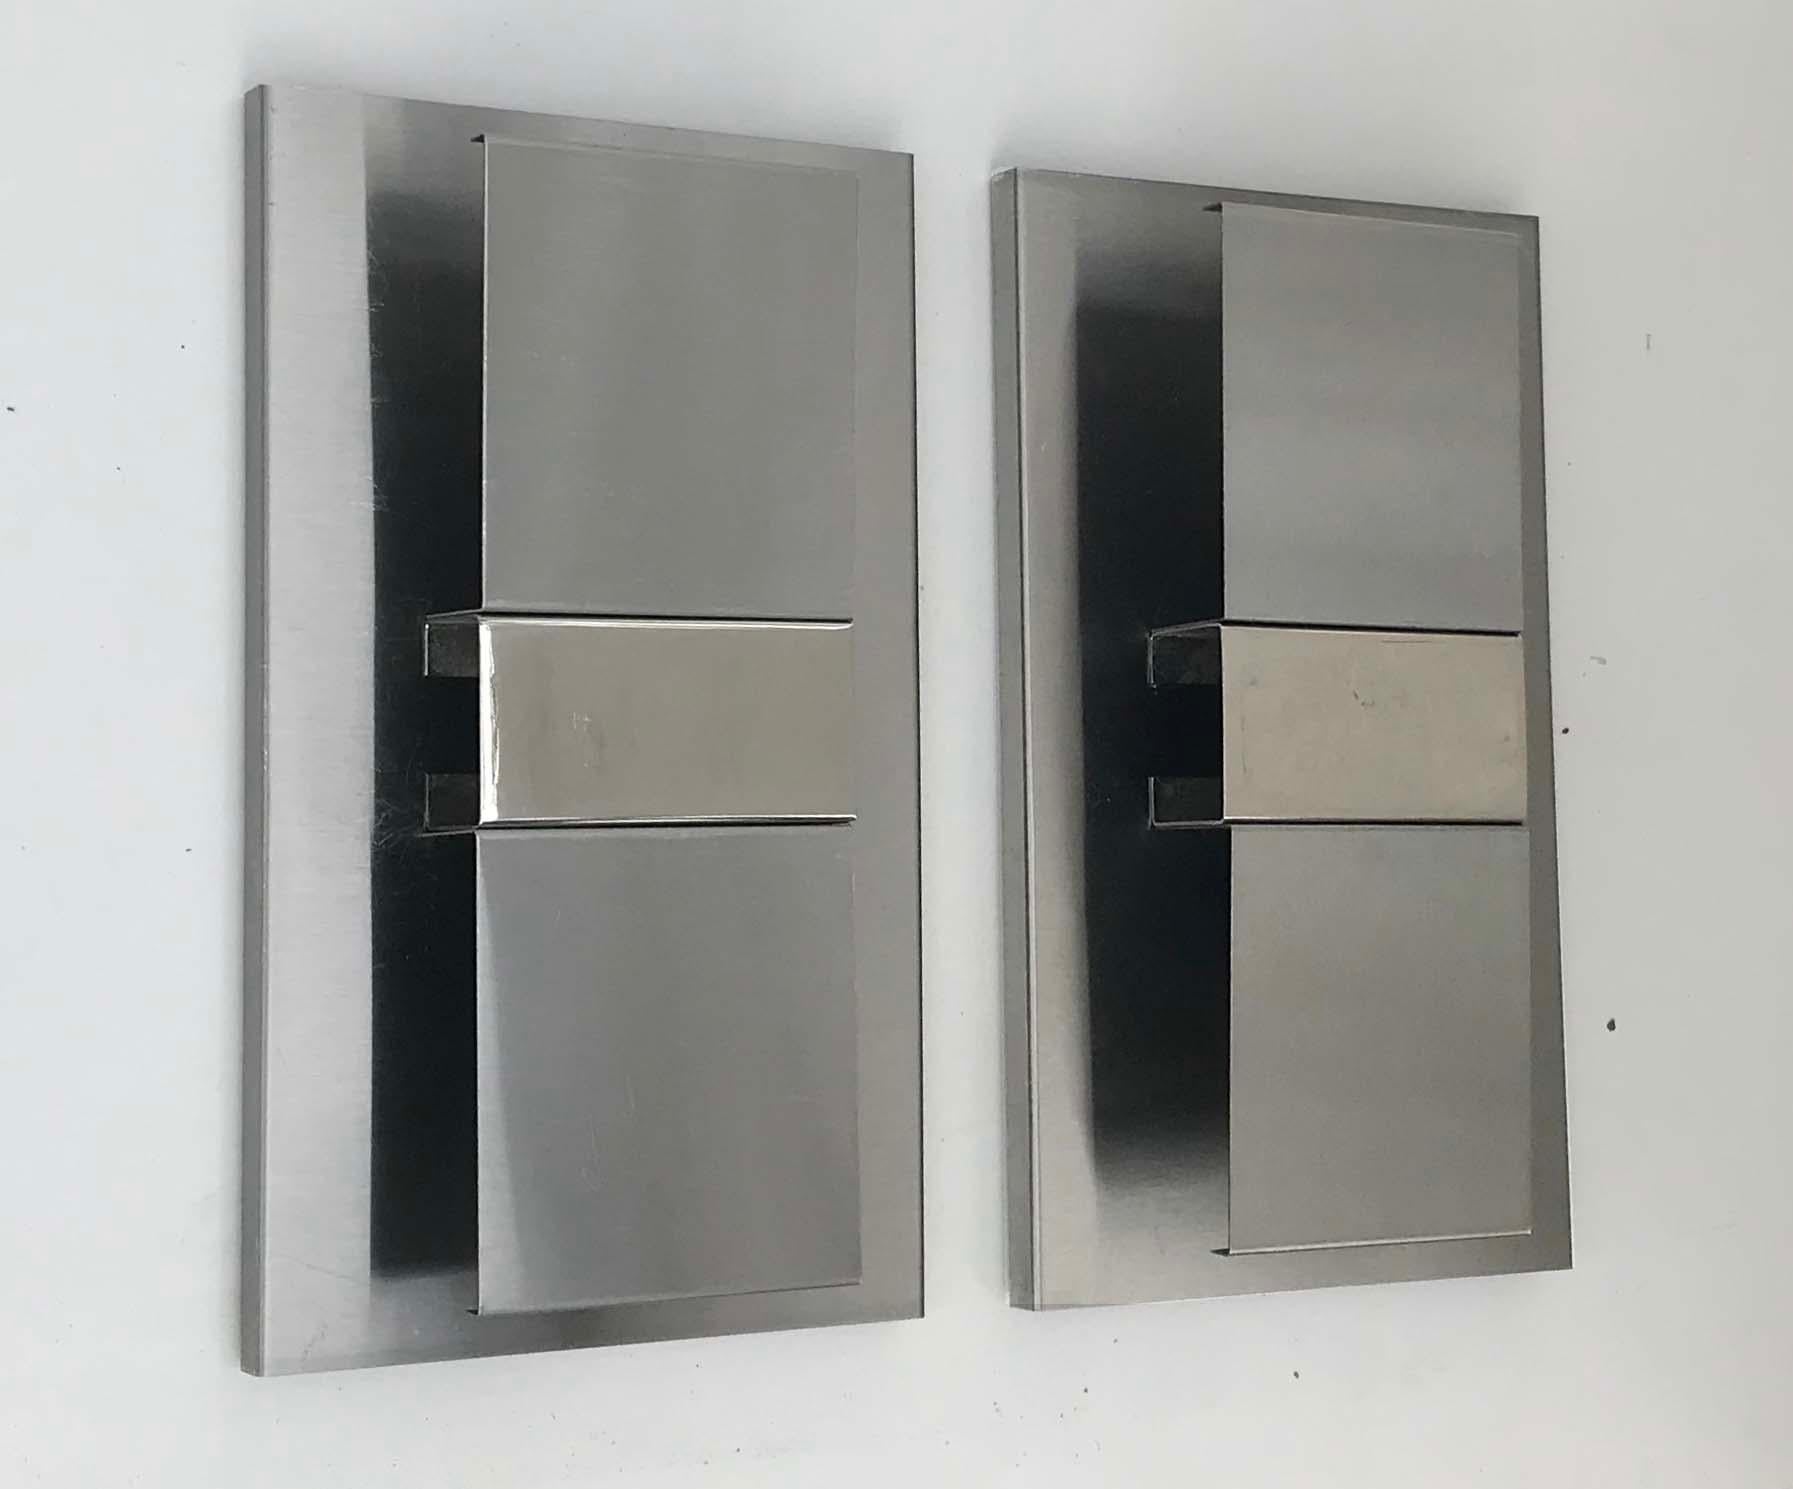 Superb set of François Monnet pairs of sconces, modernist.
Fold brushed and stainless steel panel
2 lights per sconce, 40 watts max bulb.
3 pairs available.
Good original condition.
Have a look on our impressive collection of French and Italian Mid